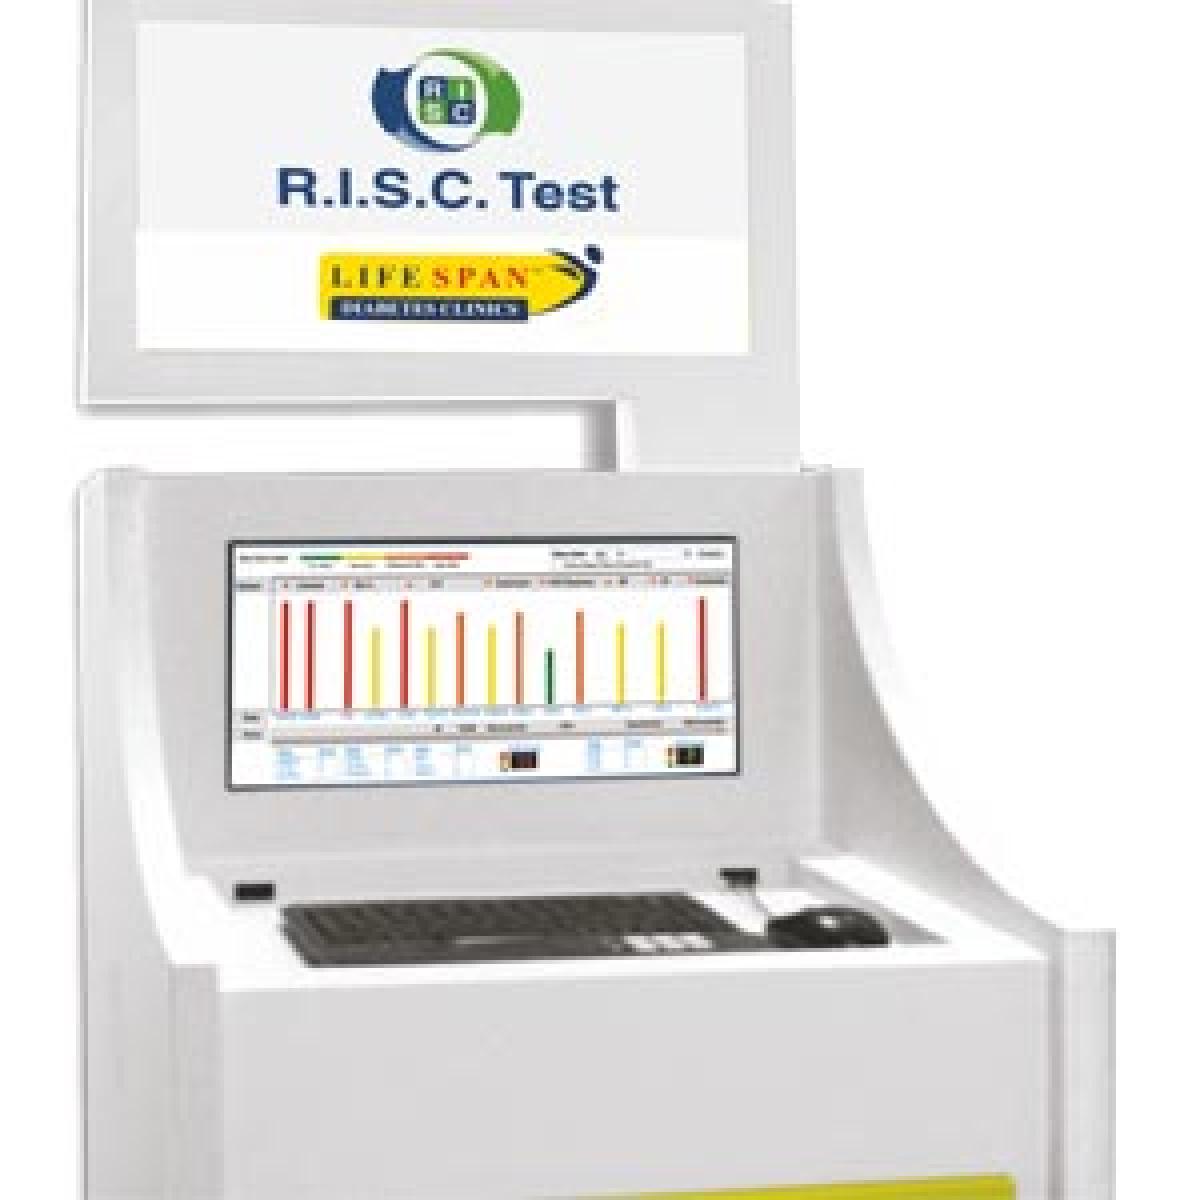 Non-invasive screening test for diabetic, Cardiometabolic complications 